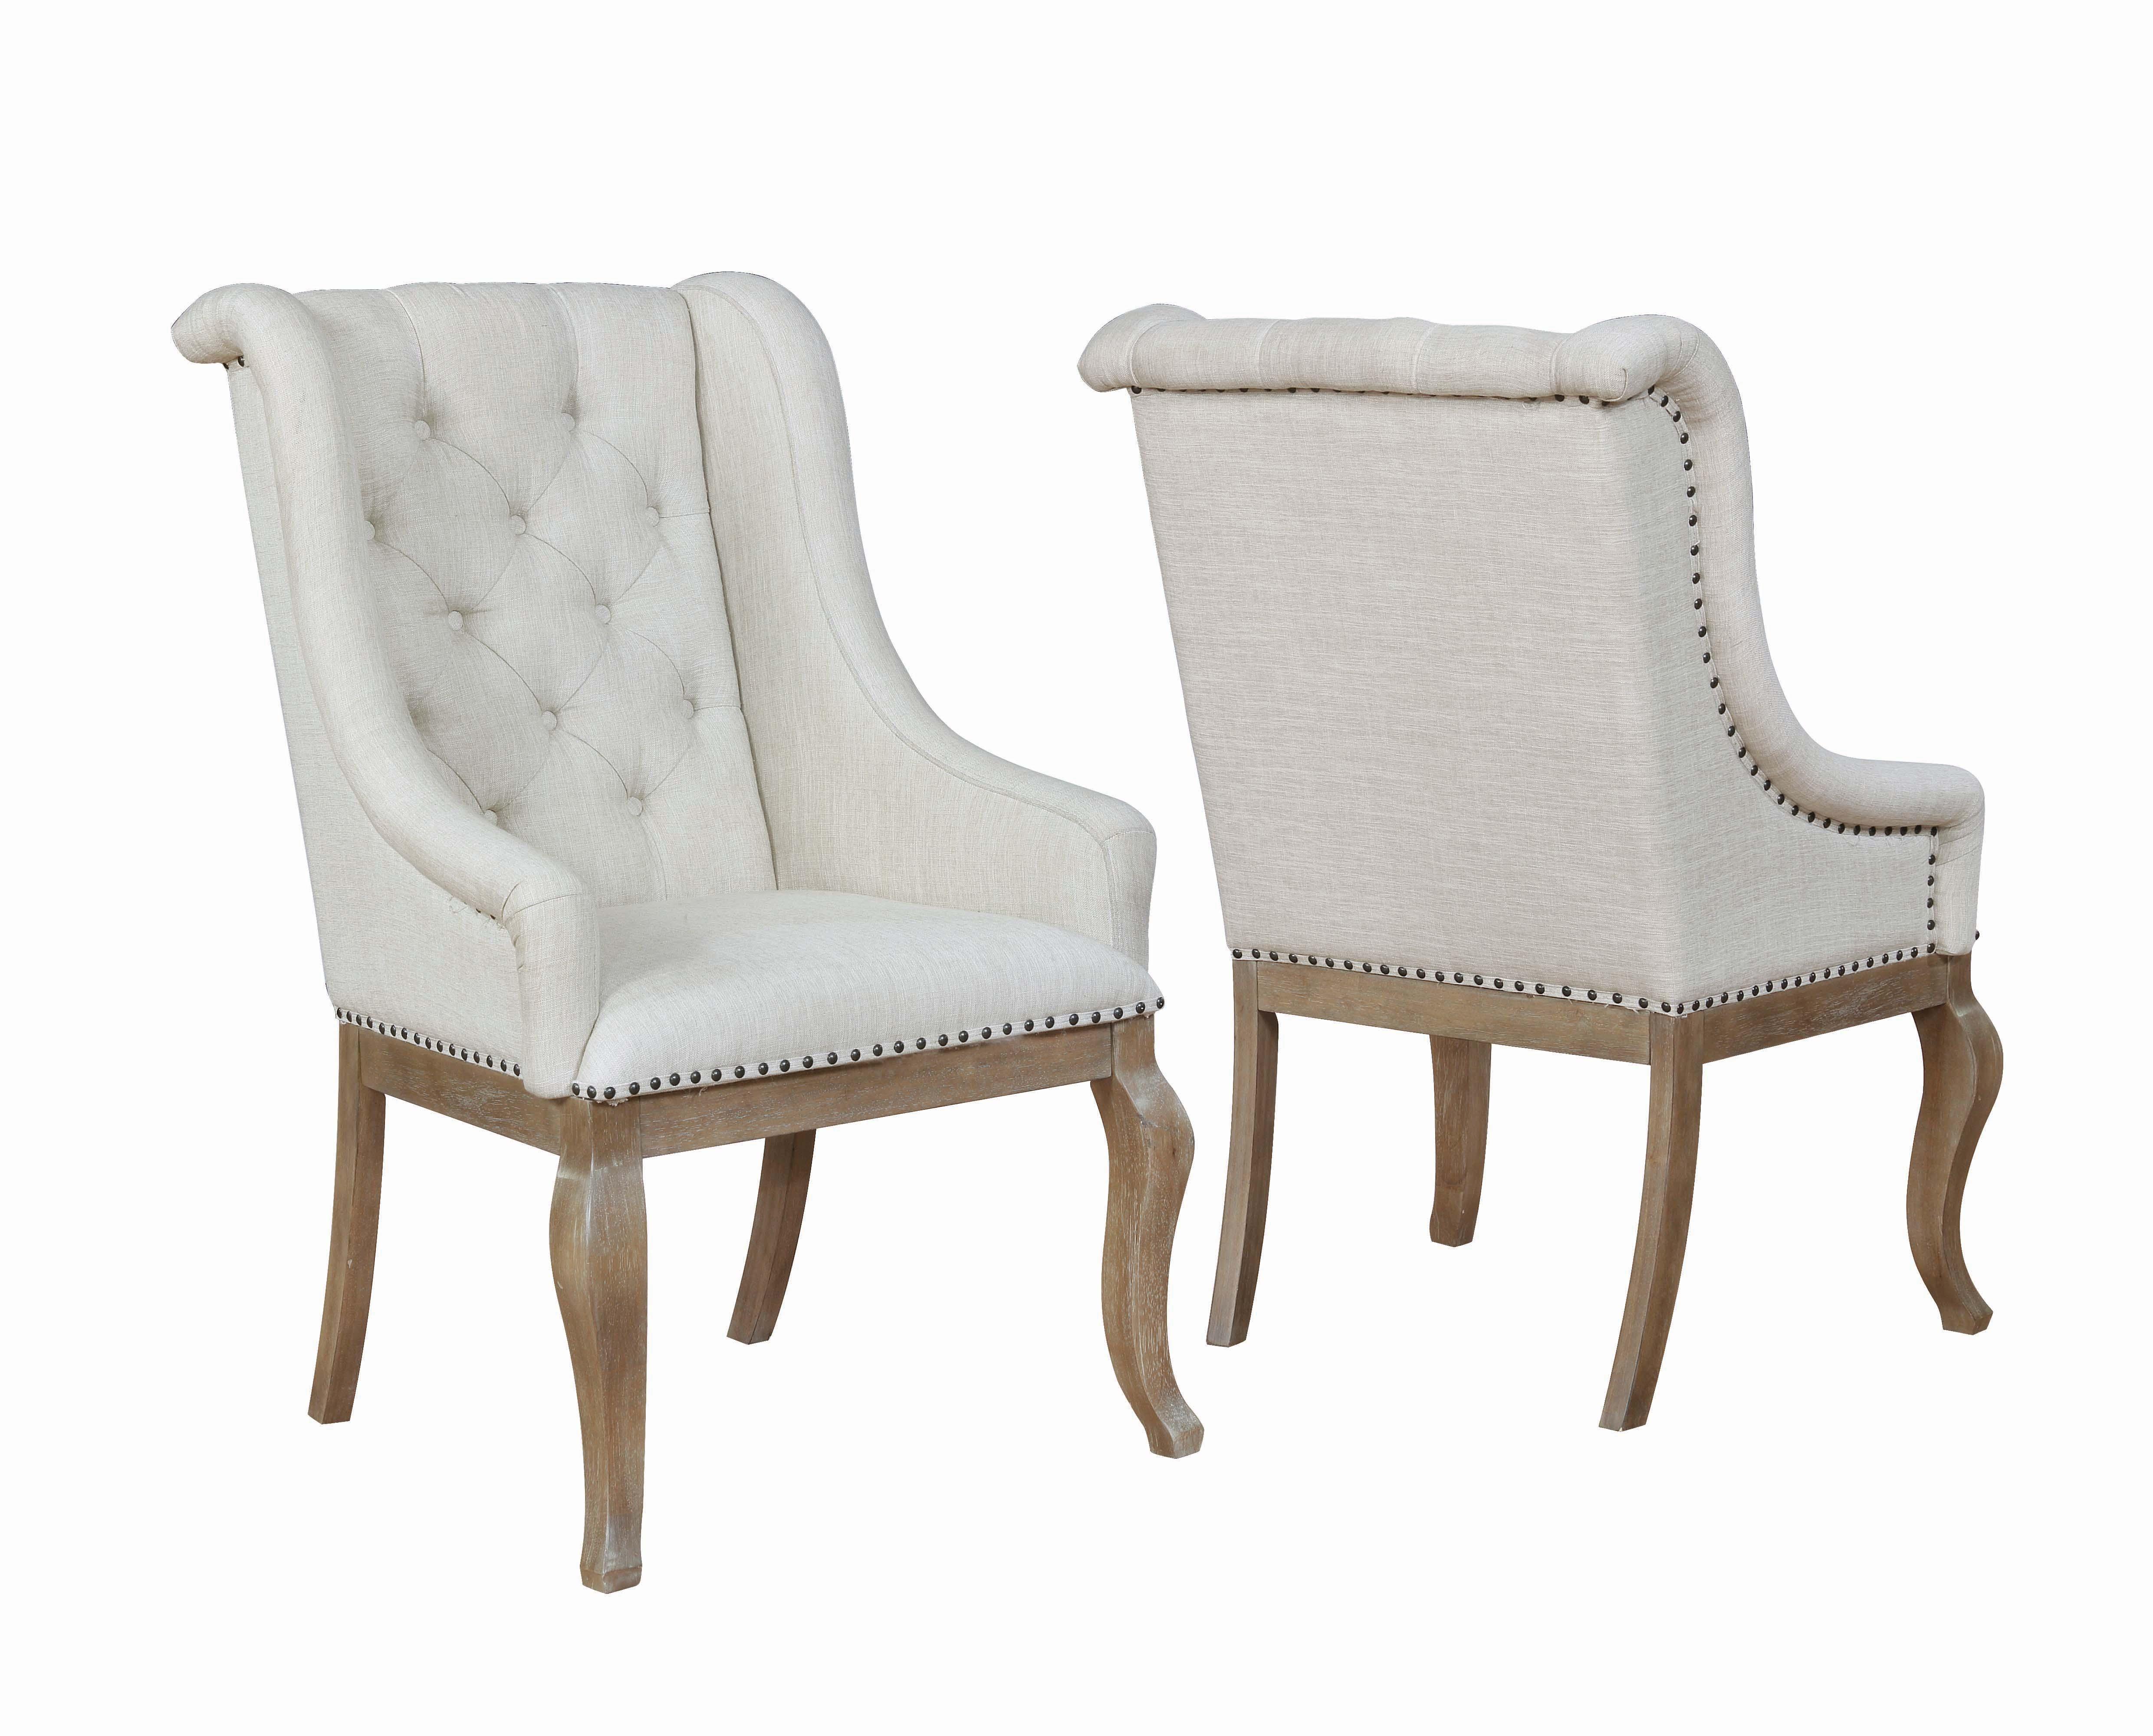 Traditional Arm Chair Glen Cove 107733 in Beige Fabric